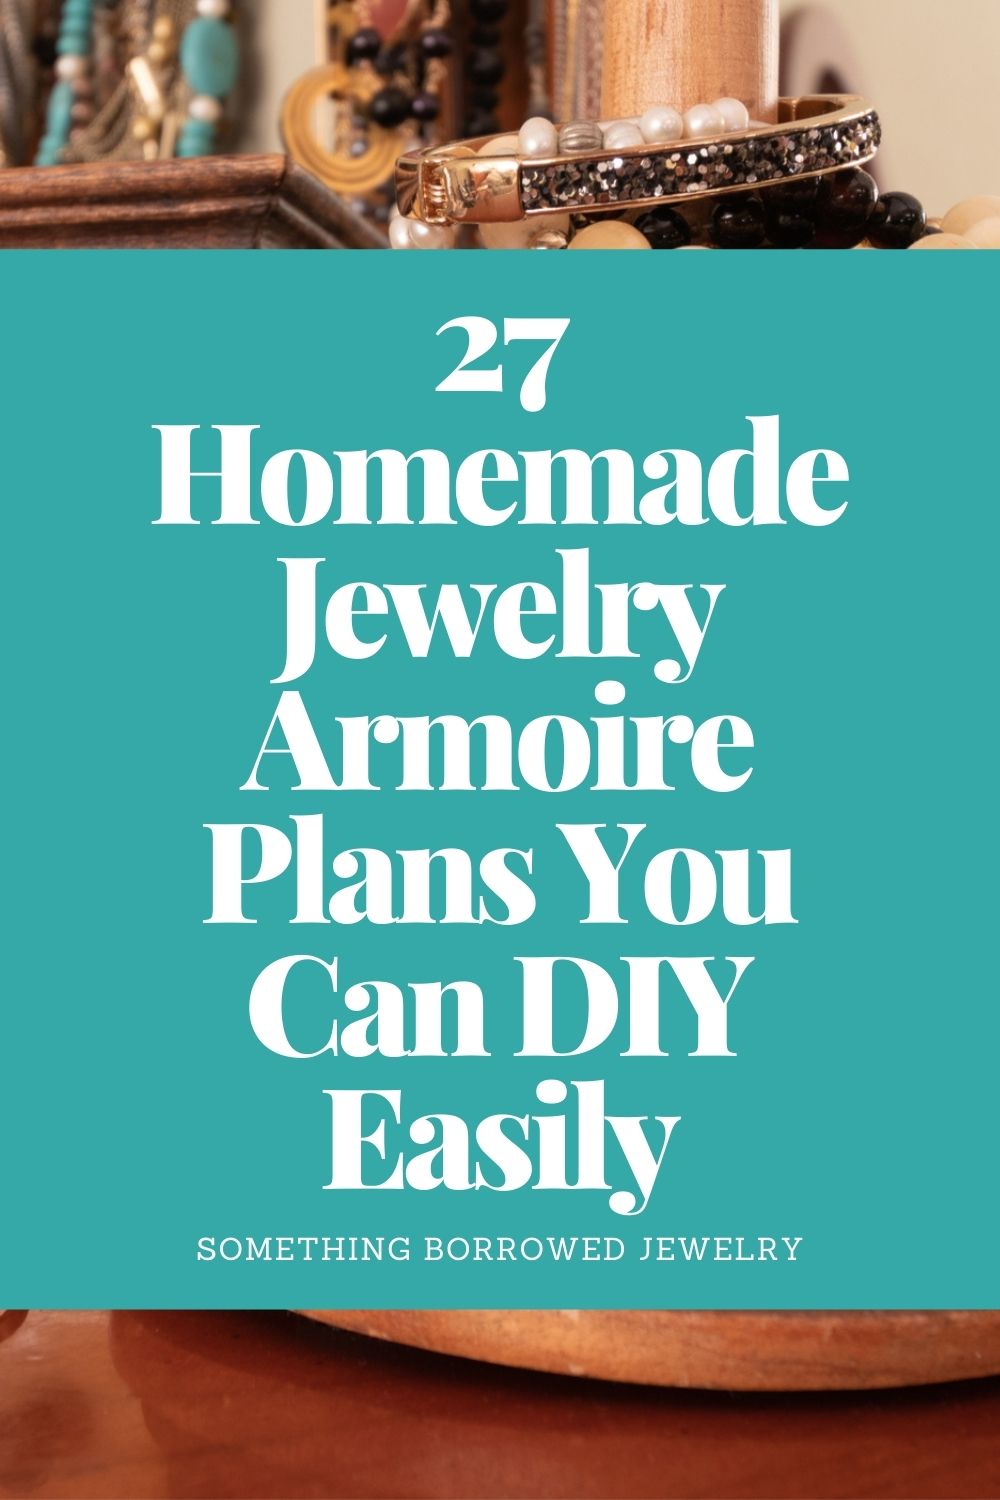 27 Homemade Jewelry Armoire Plans You Can DIY Easily pin